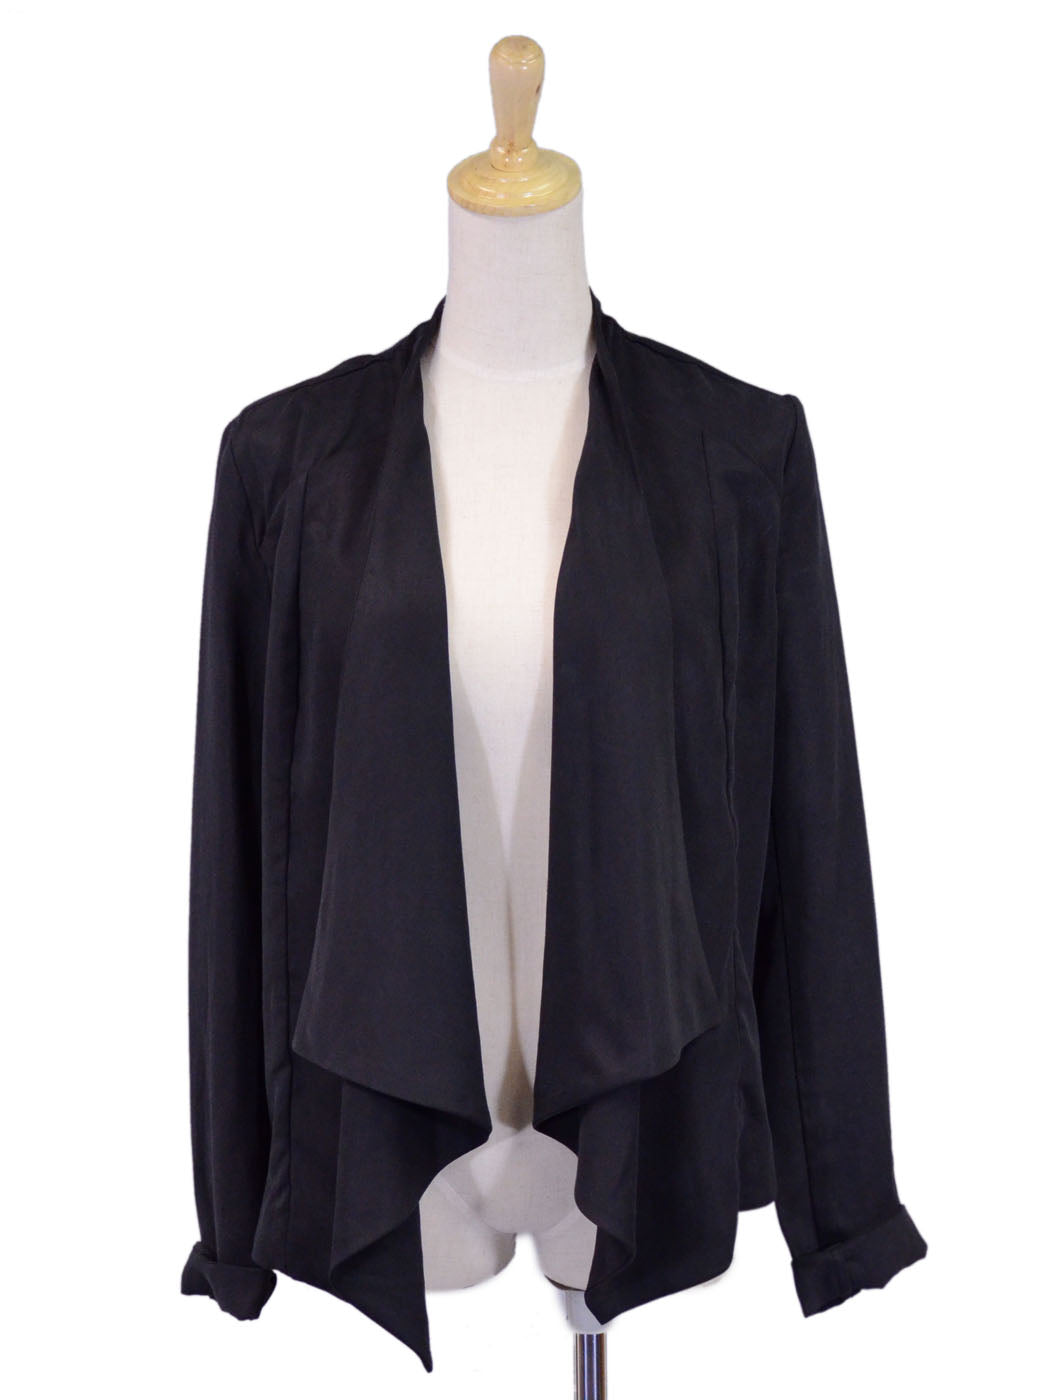 Gentle Fawn Draped Long Sleeved Heavy Weight Blazer With Back Lace Design - ALILANG.COM